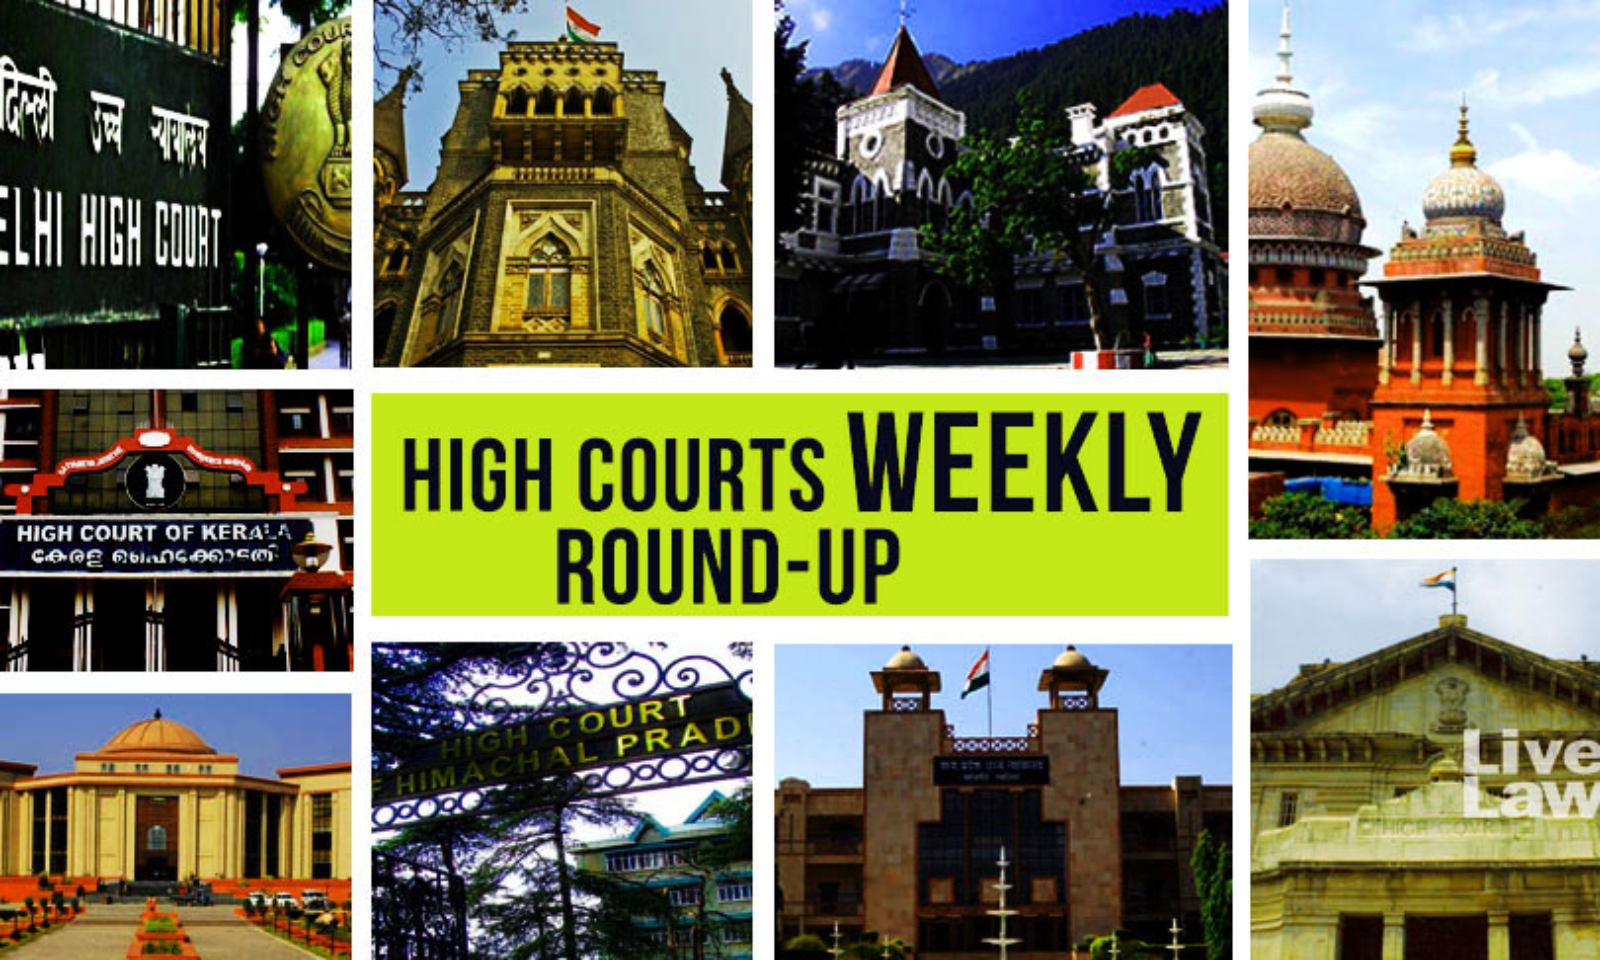 Kavitha Nair Xxn Video - All High Courts Weekly Round-Up [June 27 To July 3, 2022]